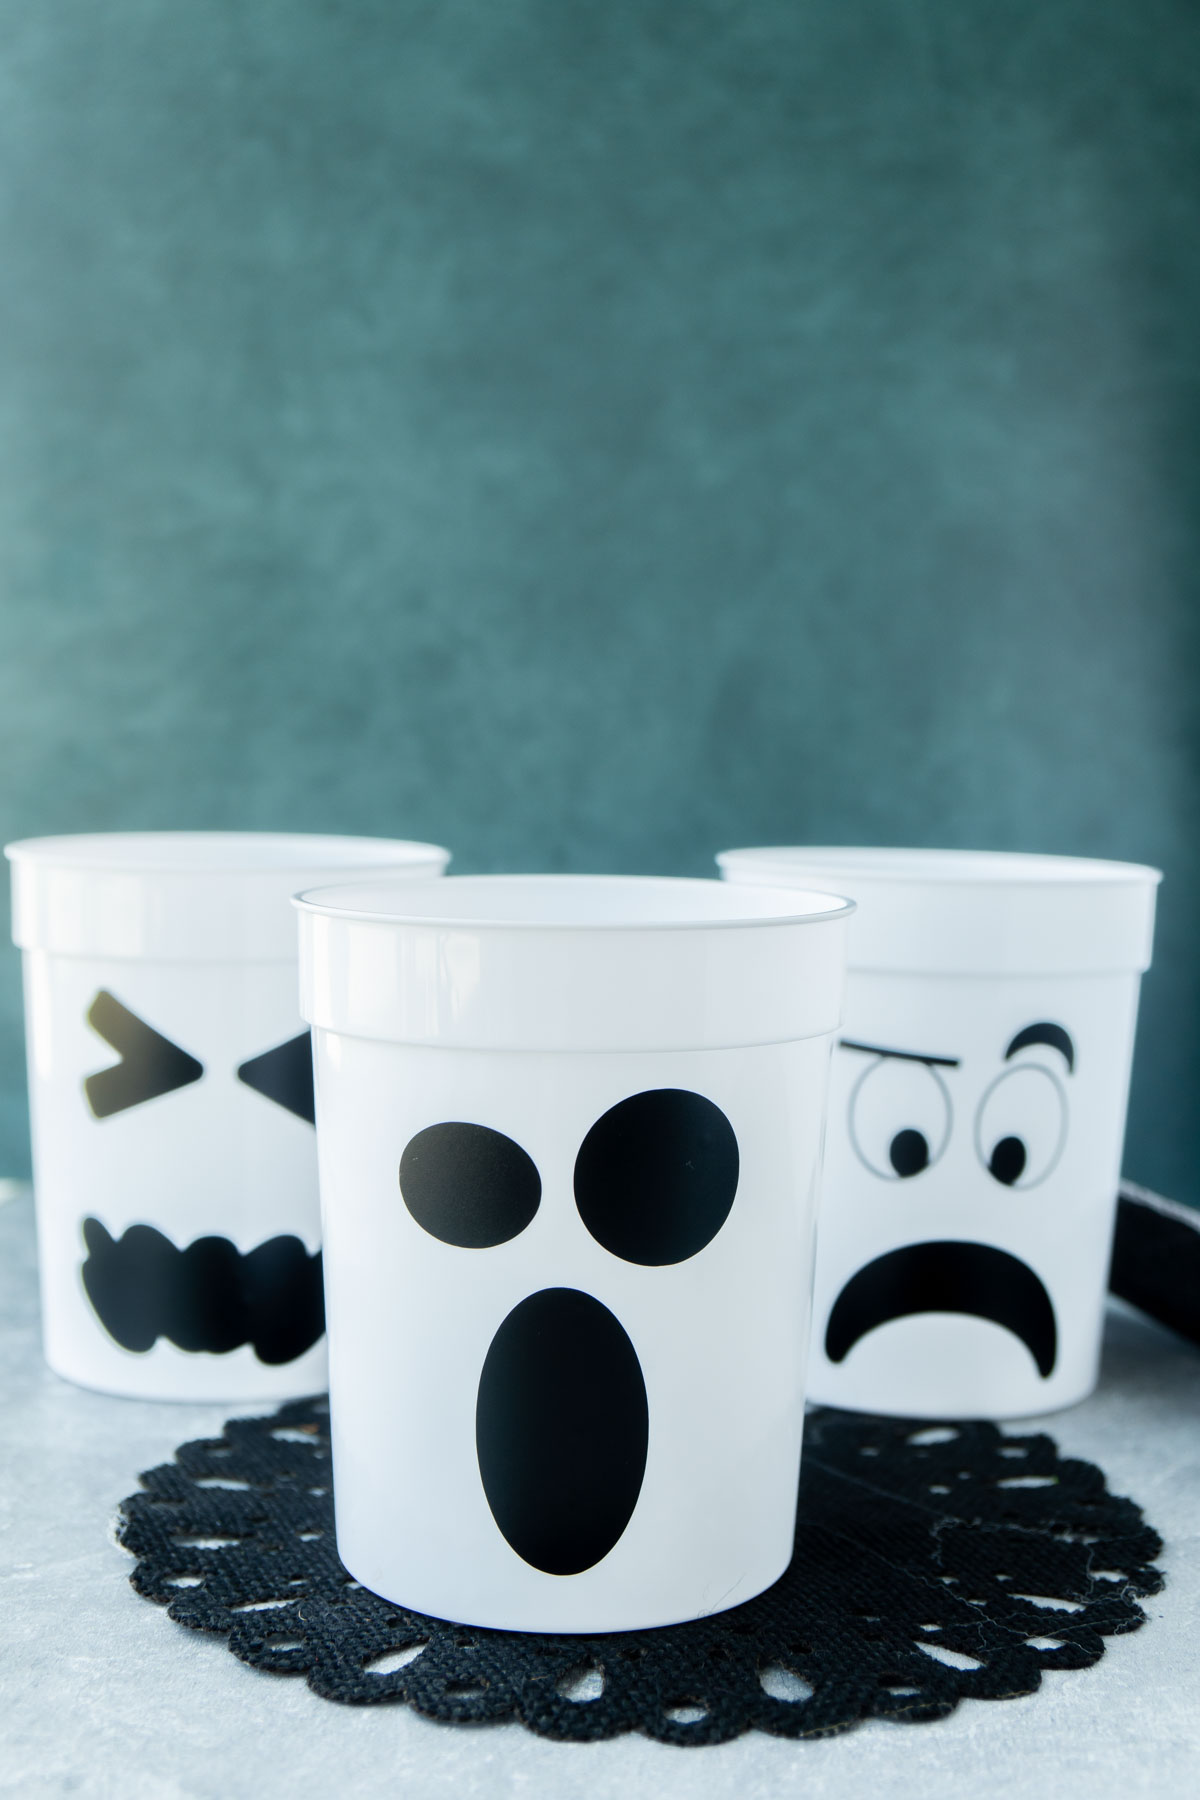 three white ghost cups with a green background